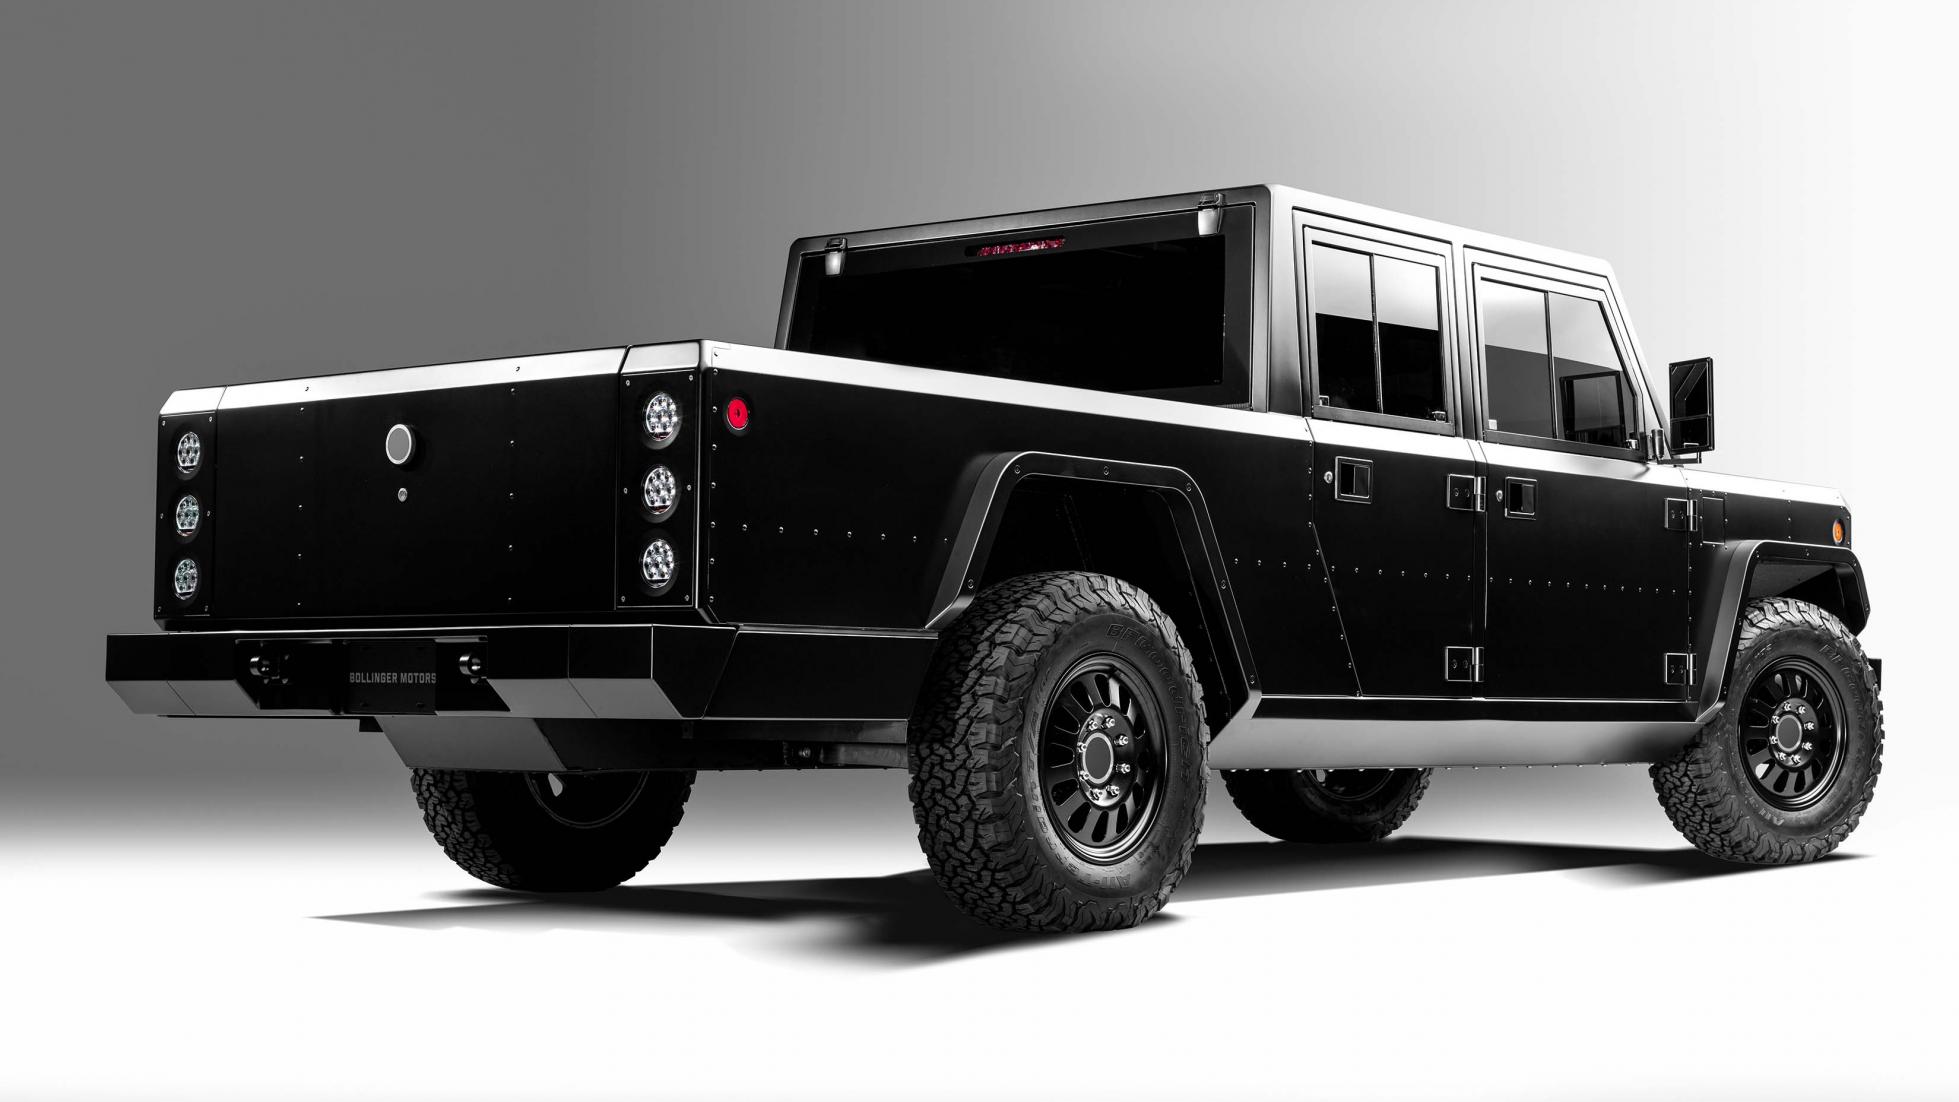 Bollinger has announced its electric 4x4s will have 606bhp